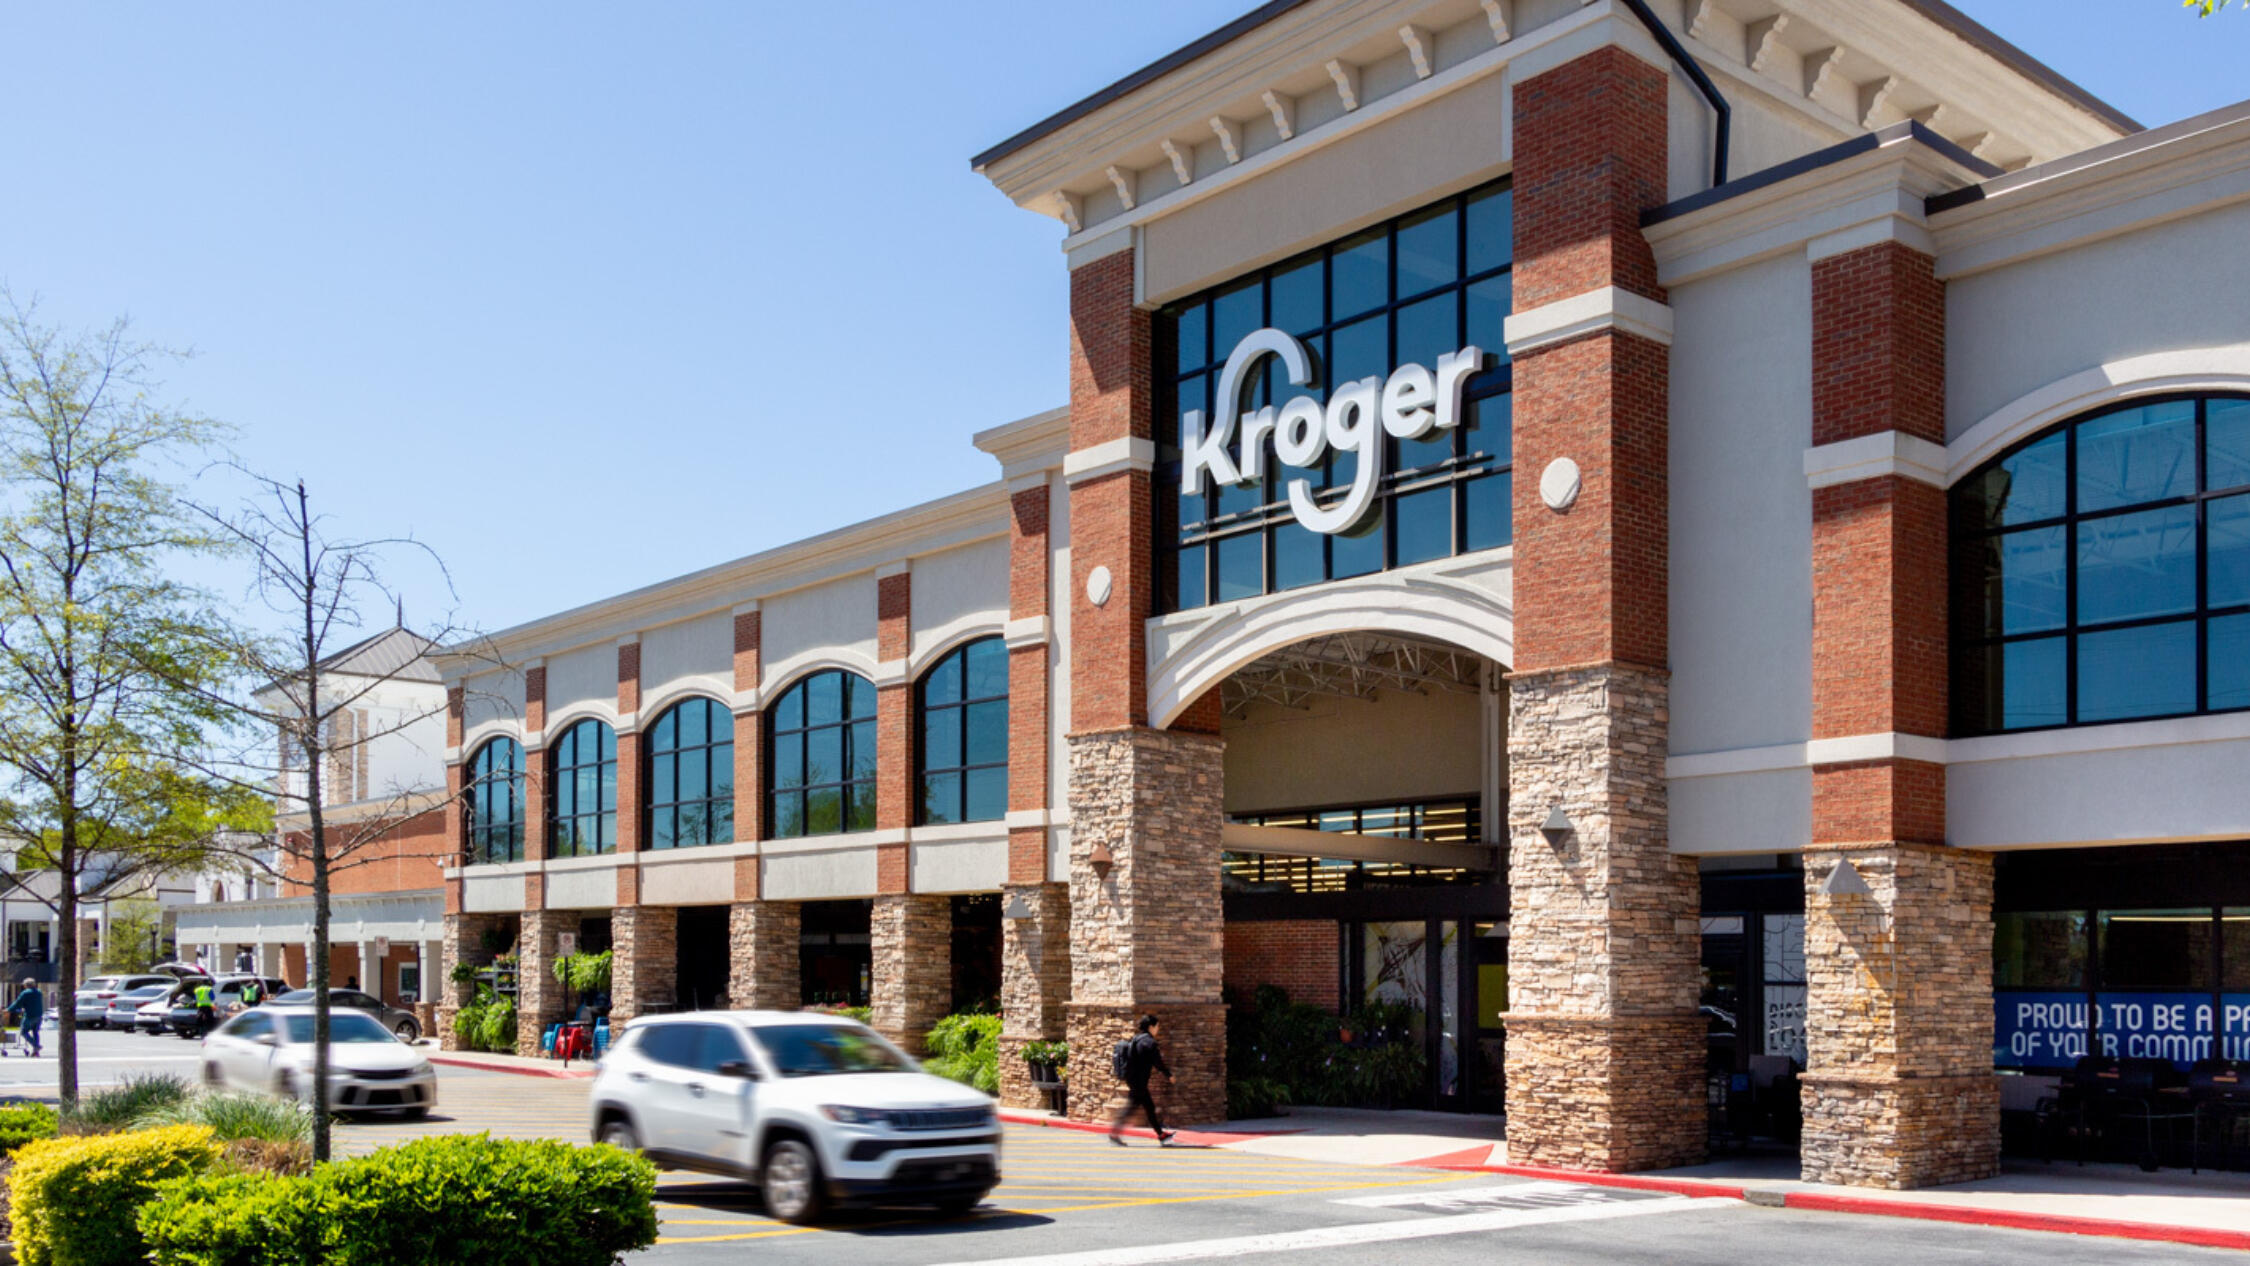 Kroger façade at Fountain Oaks with cars and pedestrians on driveaway in front